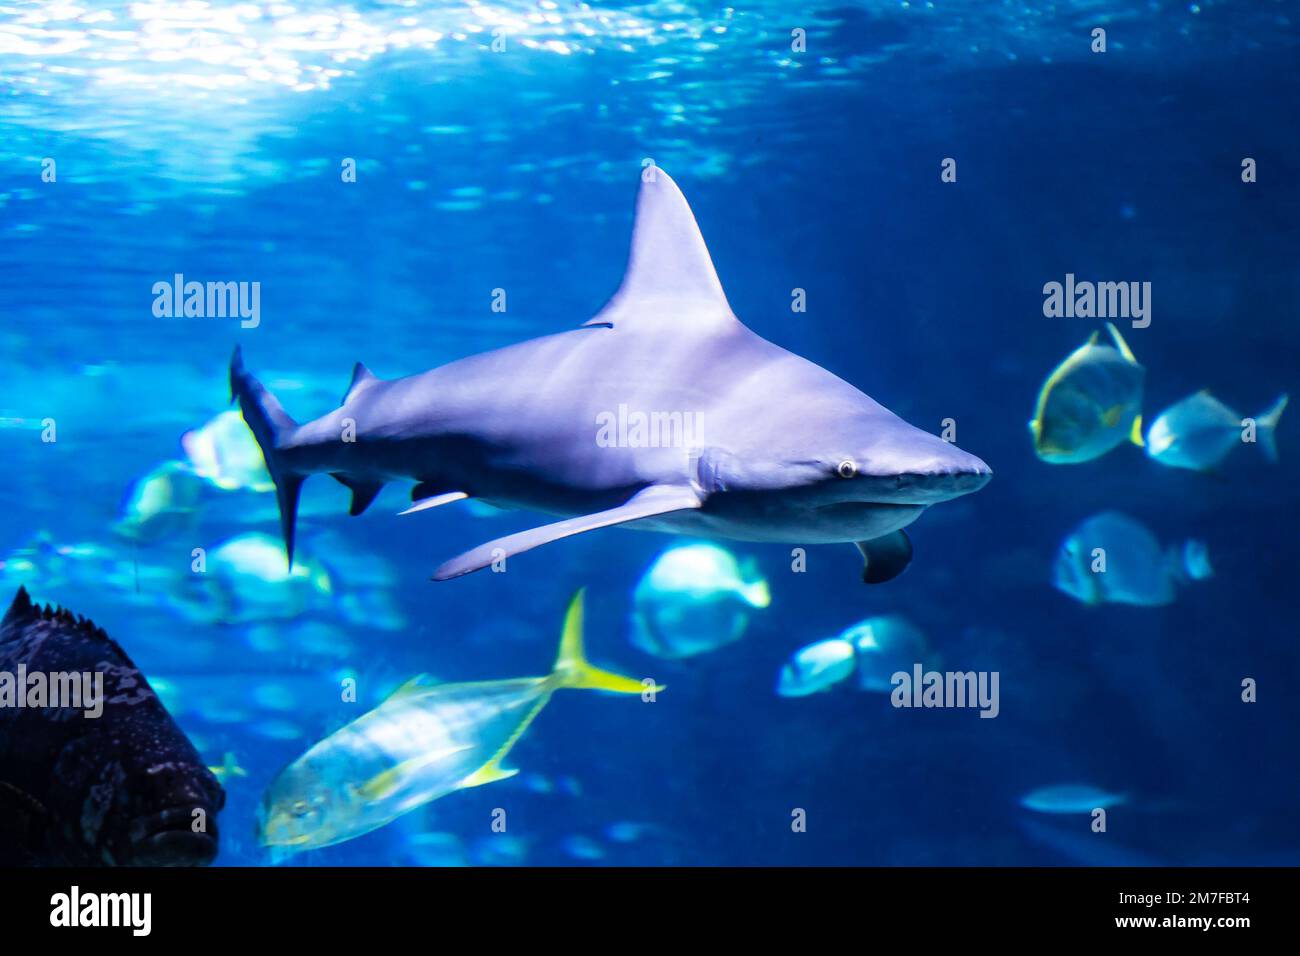 Shark in the water. Aquatic creature. Water world. Sea, ocean, lake and river fauna. Zoo and zoology. Nature and animal photography. Stock Photo